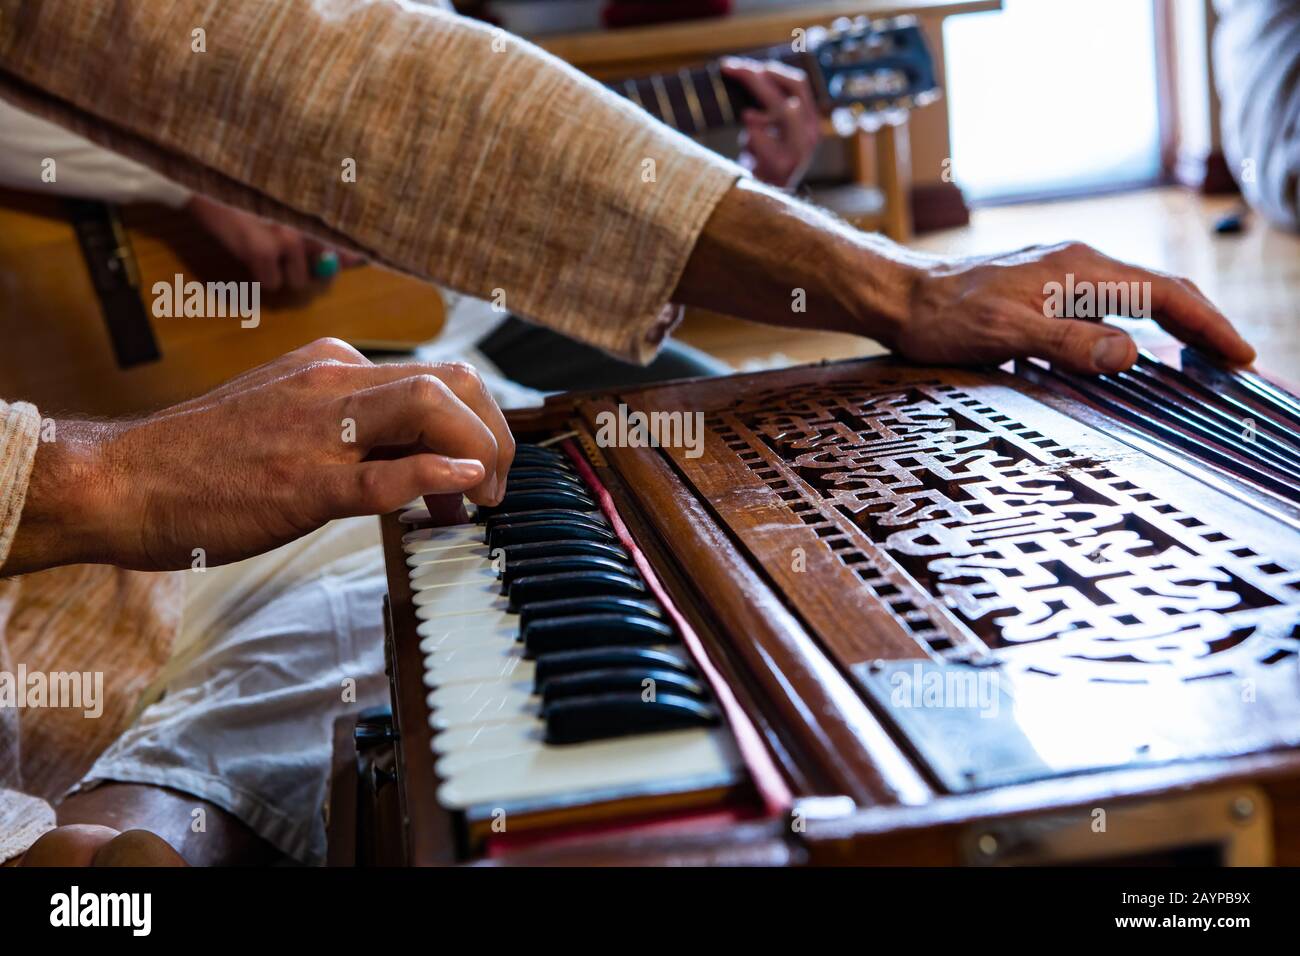 Closeup of male shamanic hands playing sacred kirtan music with fingers on keys of harmonium while sitting in room for peaceful meditation Stock Photo